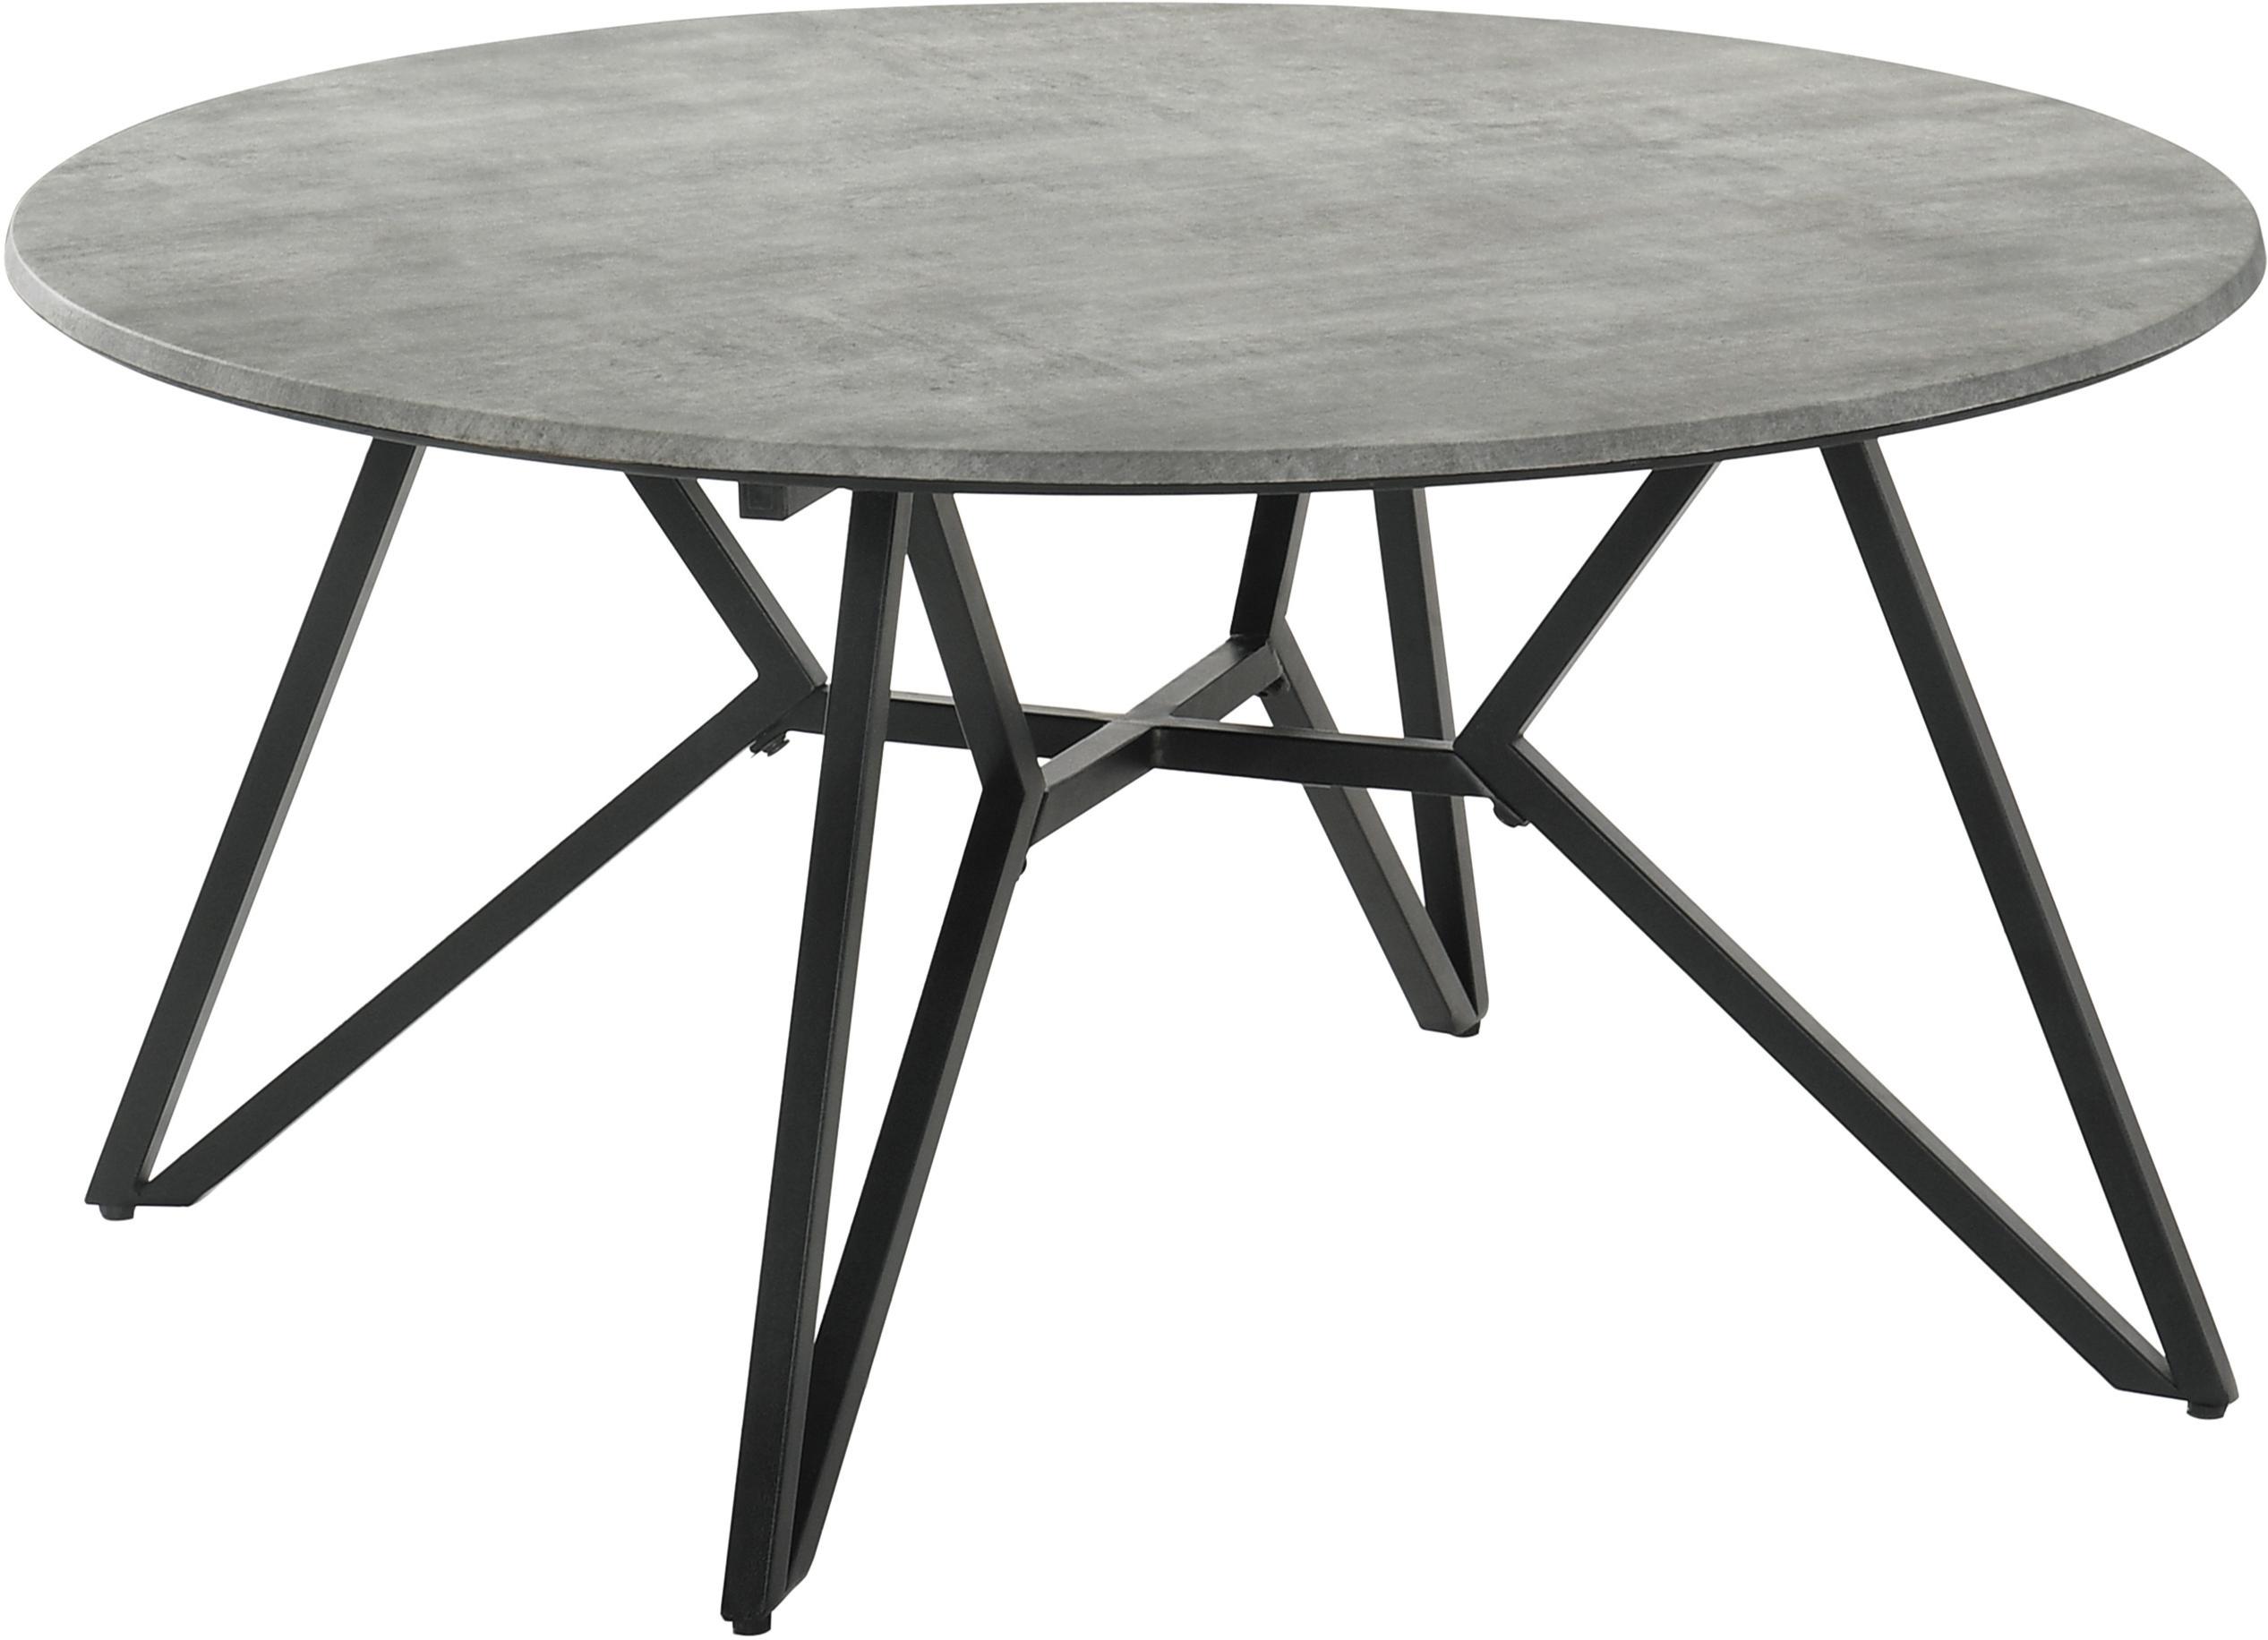 Modern Coffee Table 736178 736178 in Gray 